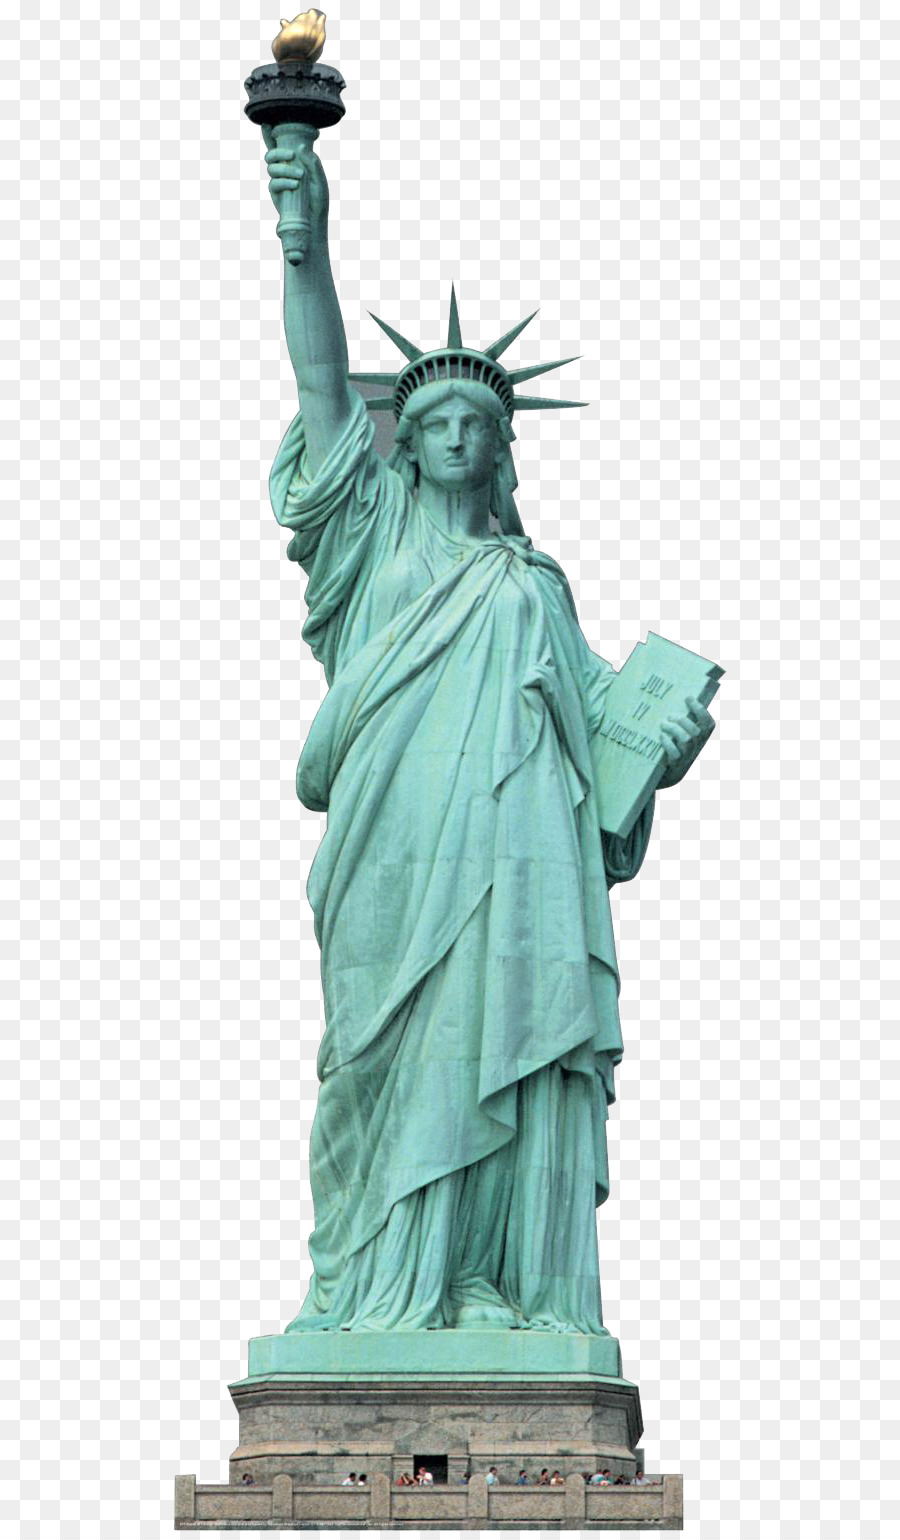 Statue of Liberty Statue of Unity Graphic arts - statue of liberty png download - 575*1536 - Free Transparent Statue Of Liberty png Download.